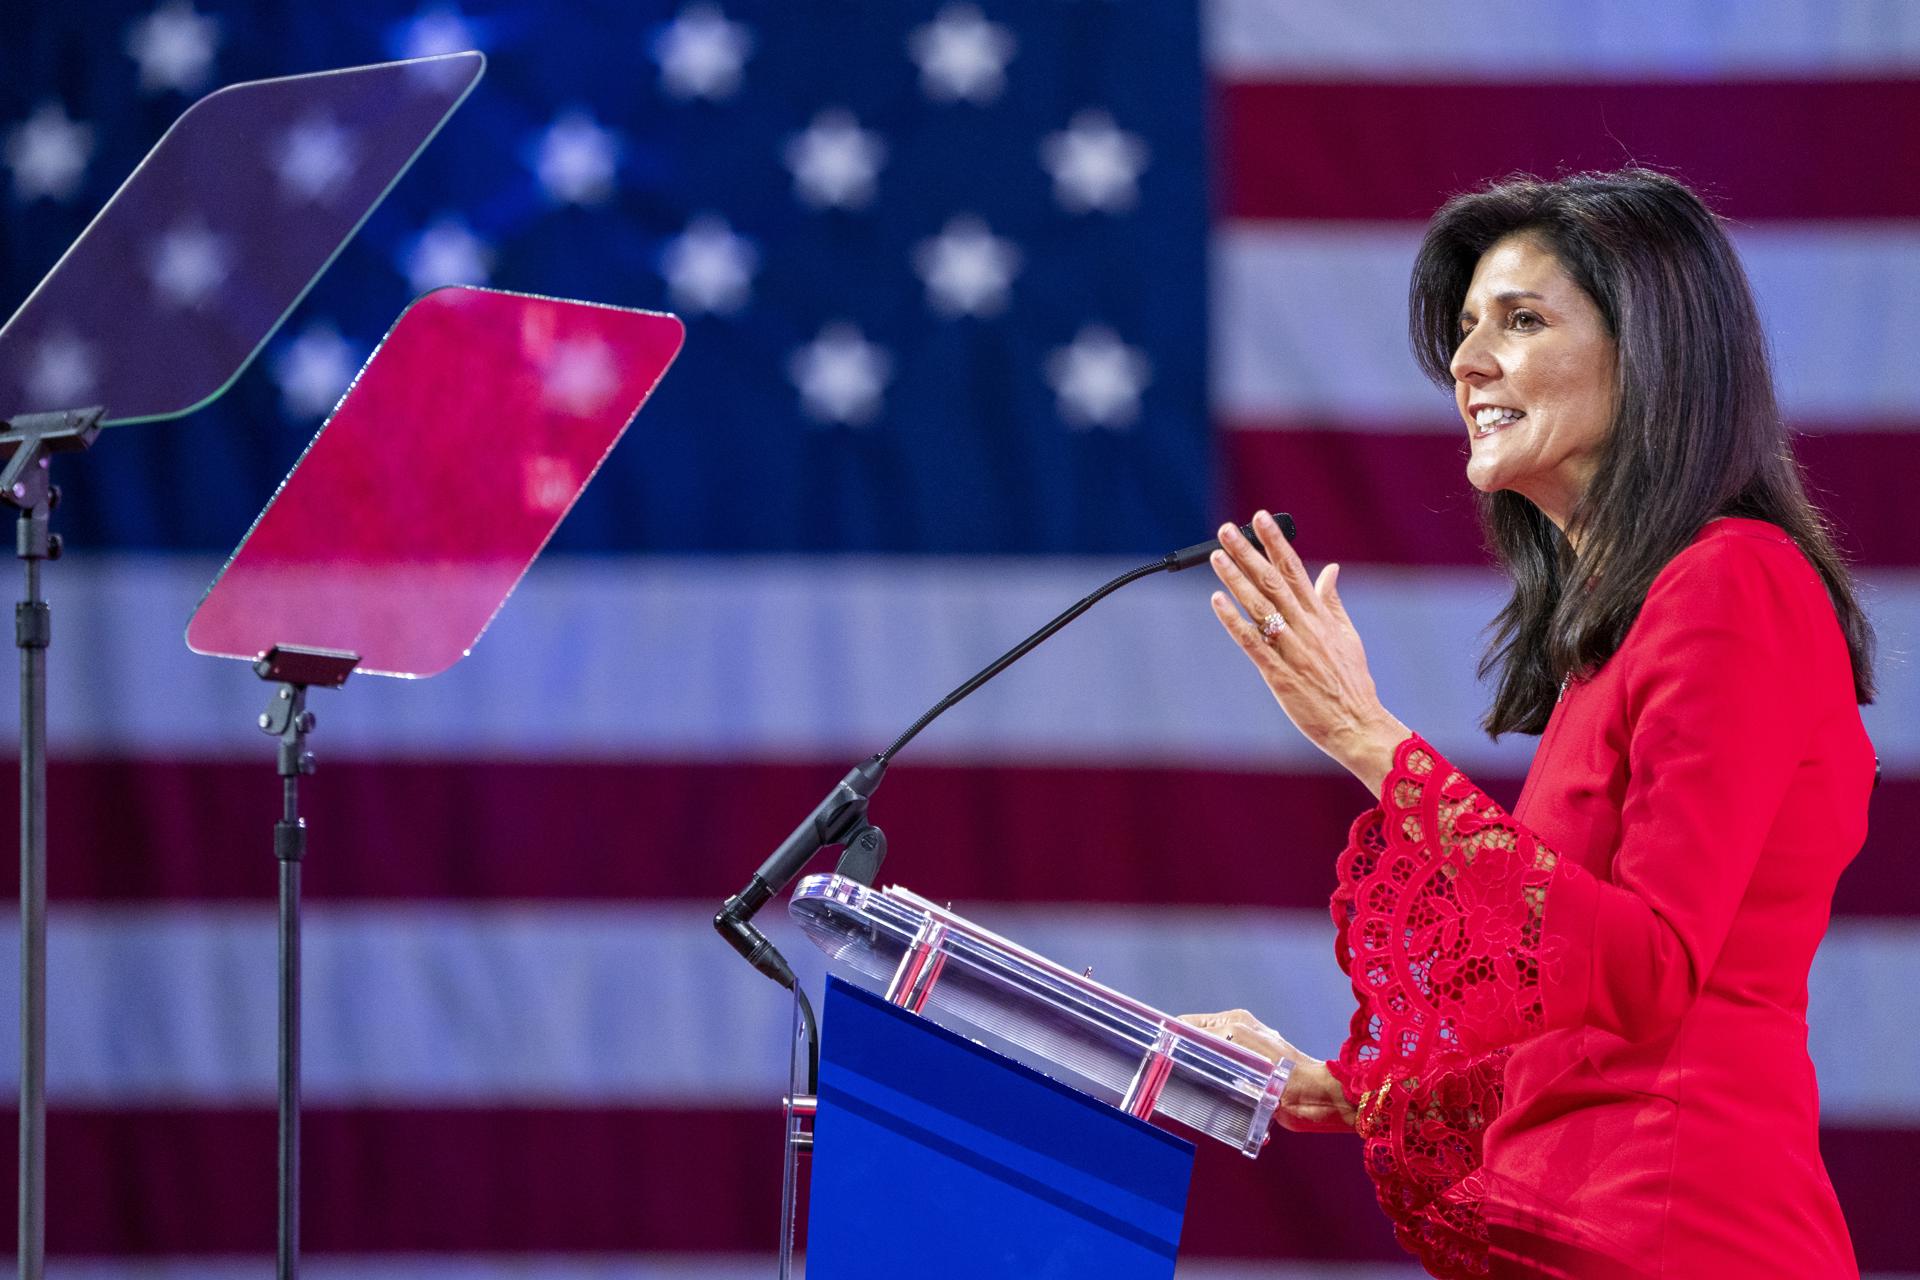 Former South Carolina Gov. Nikki Haley speaks at the Conservative Political Action Conference in Oxon Hill, Maryland, on 3 March 2023. EFE/EPA/SHAWN THEW